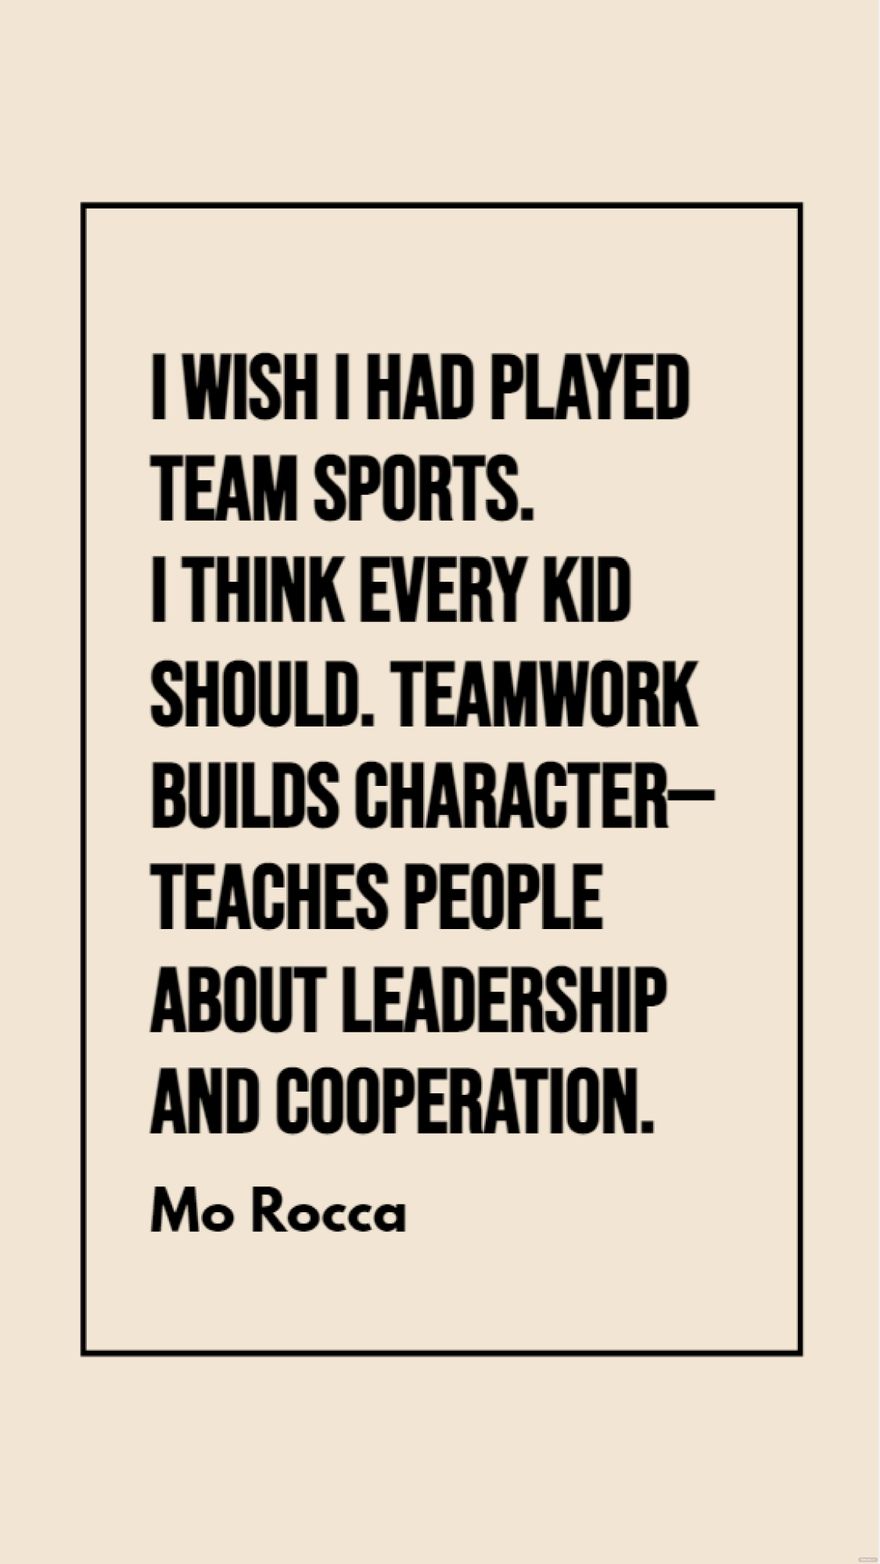 Mo Rocca - I wish I had played team sports. I think every kid should. Teamwork builds character - teaches people about leadership and cooperation.